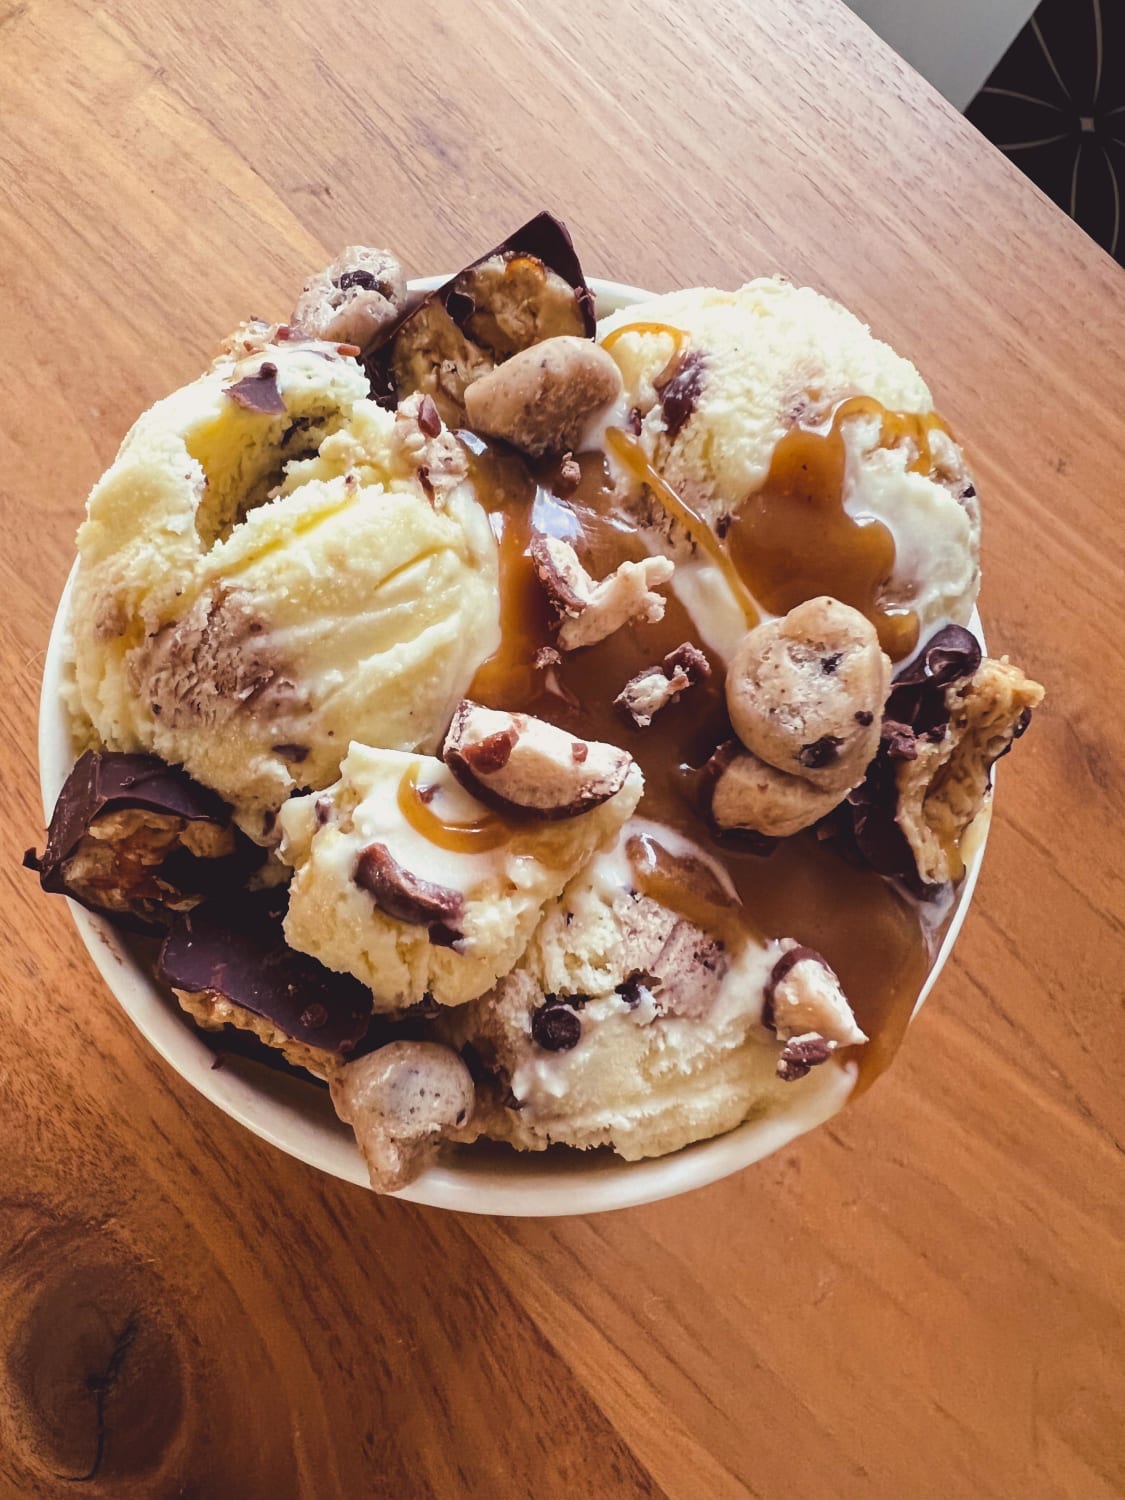 [homemade] Midnight munchies- Malted ice cream with salted caramel swirl, cookie dough, malteasers, and pretzel/potato chip peanut butter cups.